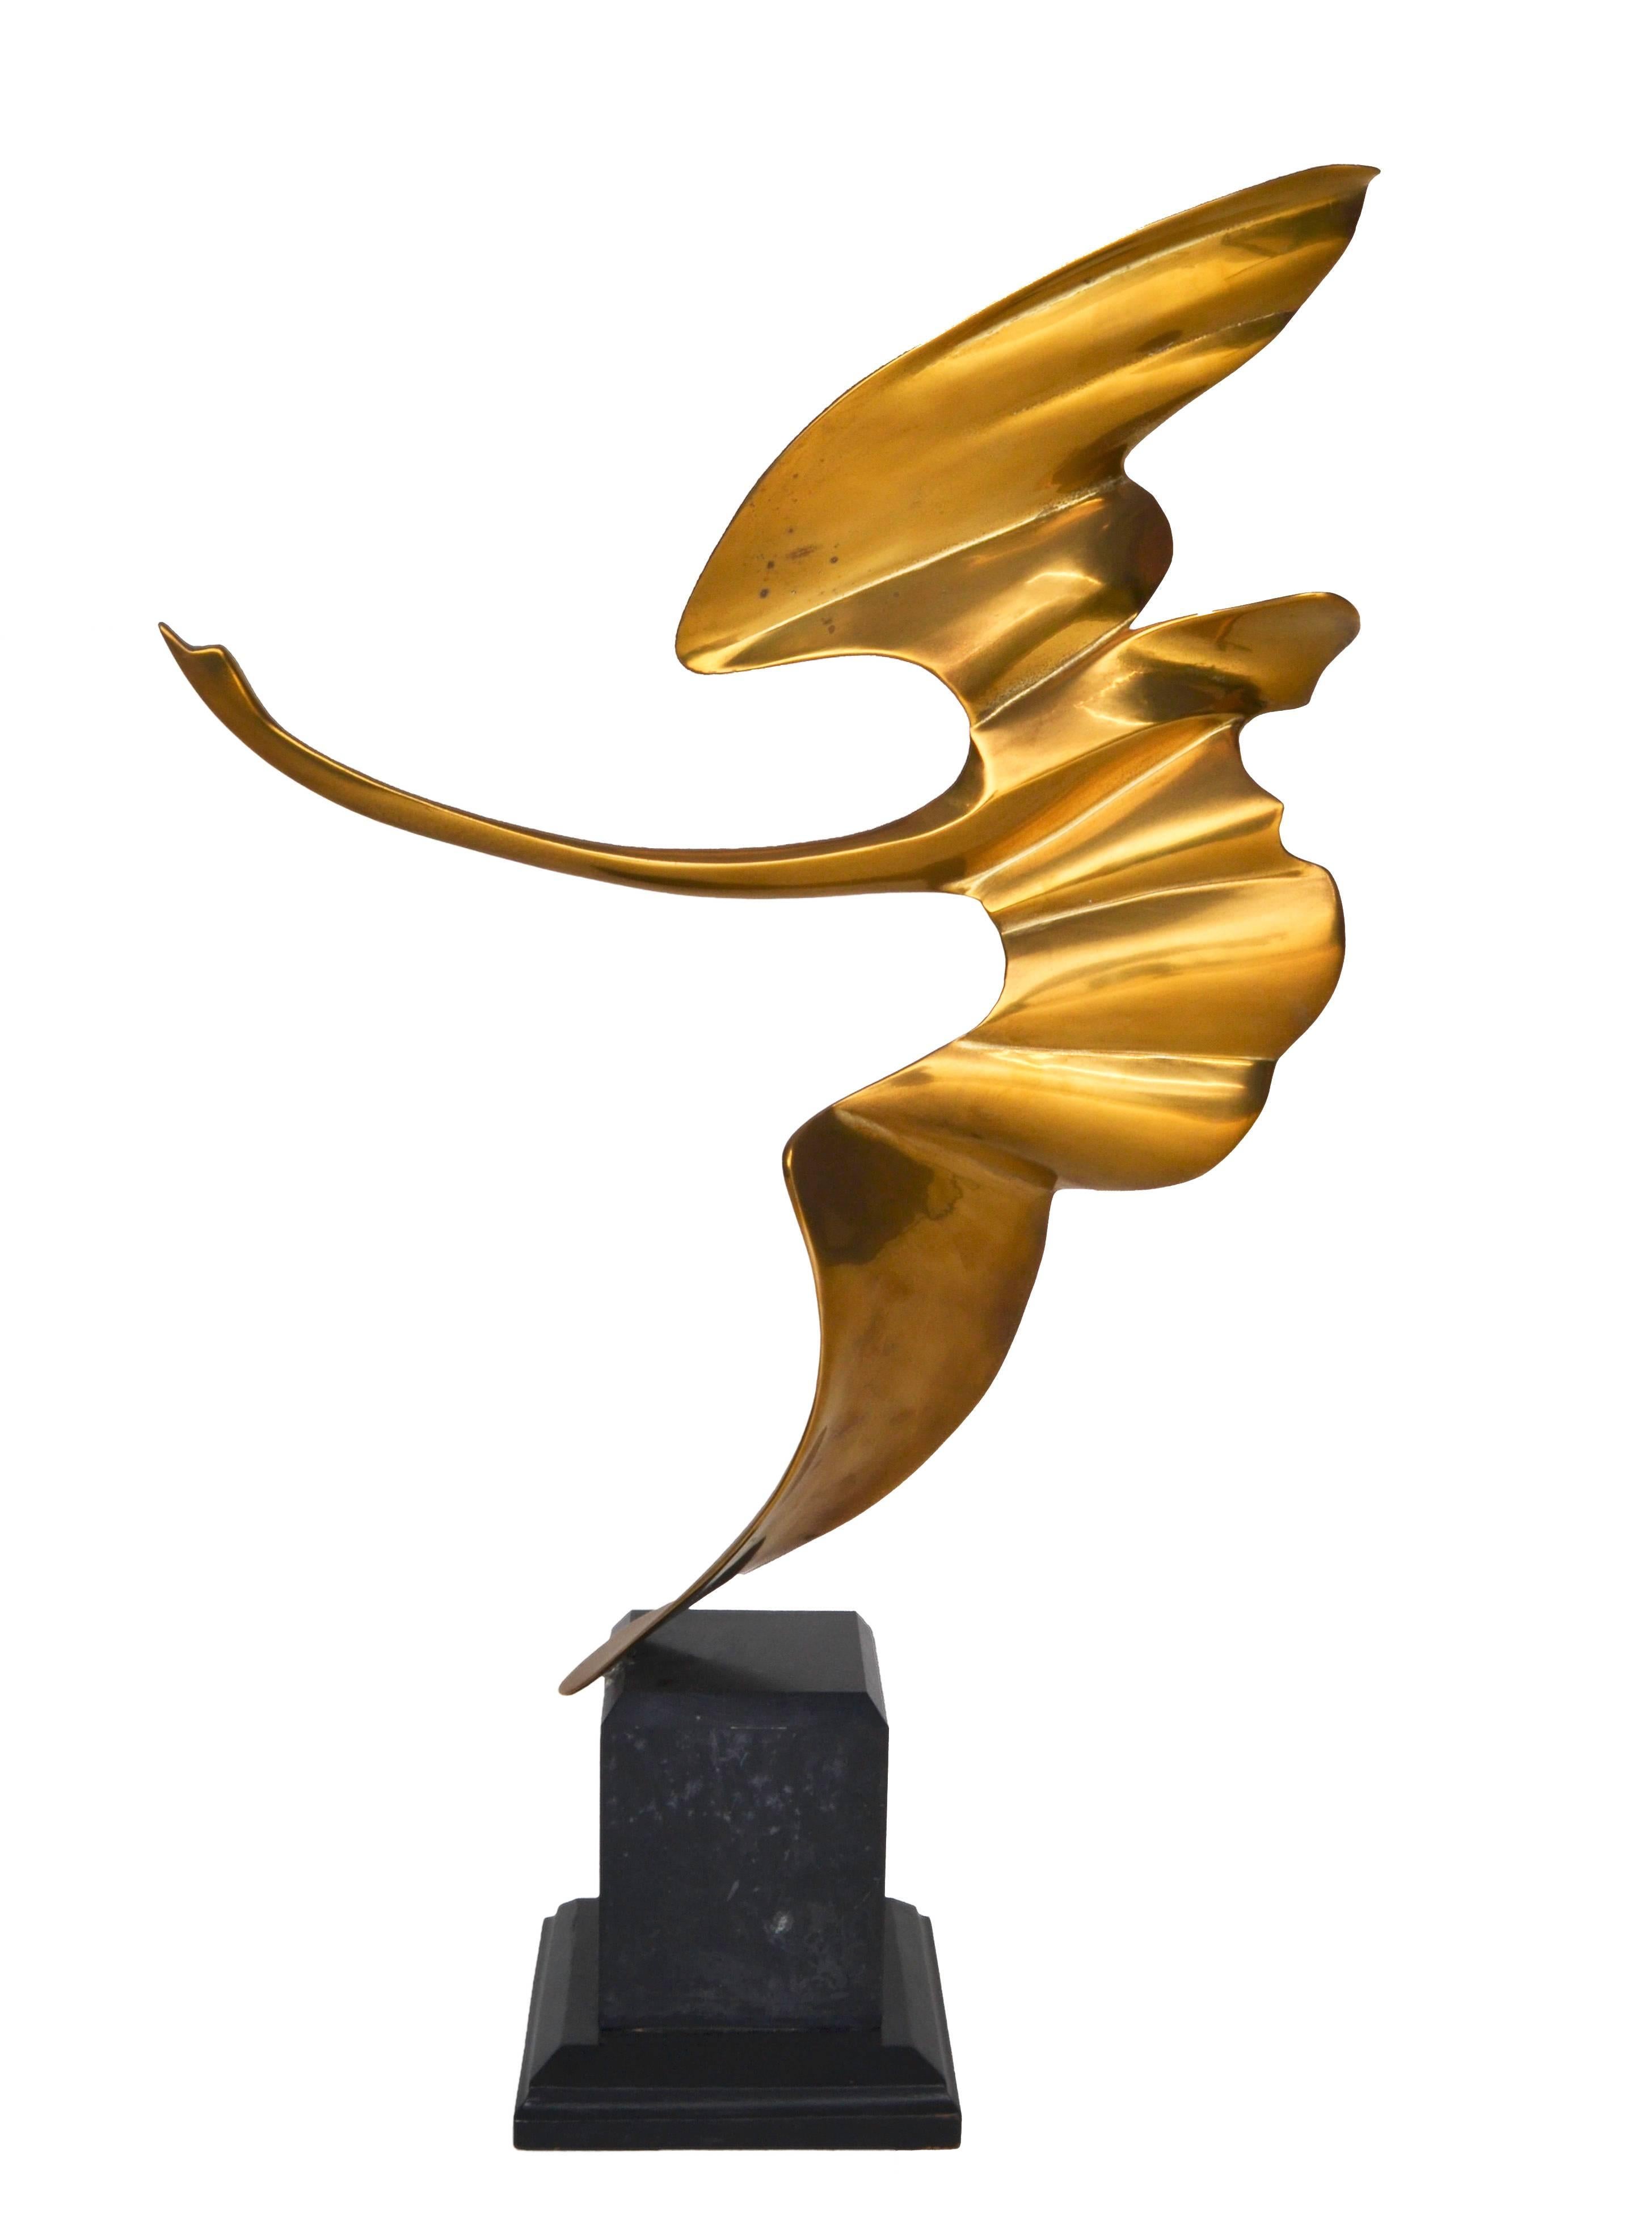 Mid-Century Modern bronze abstract bird sculpture on a wood base by Hattakitkosol Somchai (1934-2000). 
Marked and dated by artist: Somchai '87. 
Hattakitkosol Somchai was a Thai artist who specialized in metal sculpture.